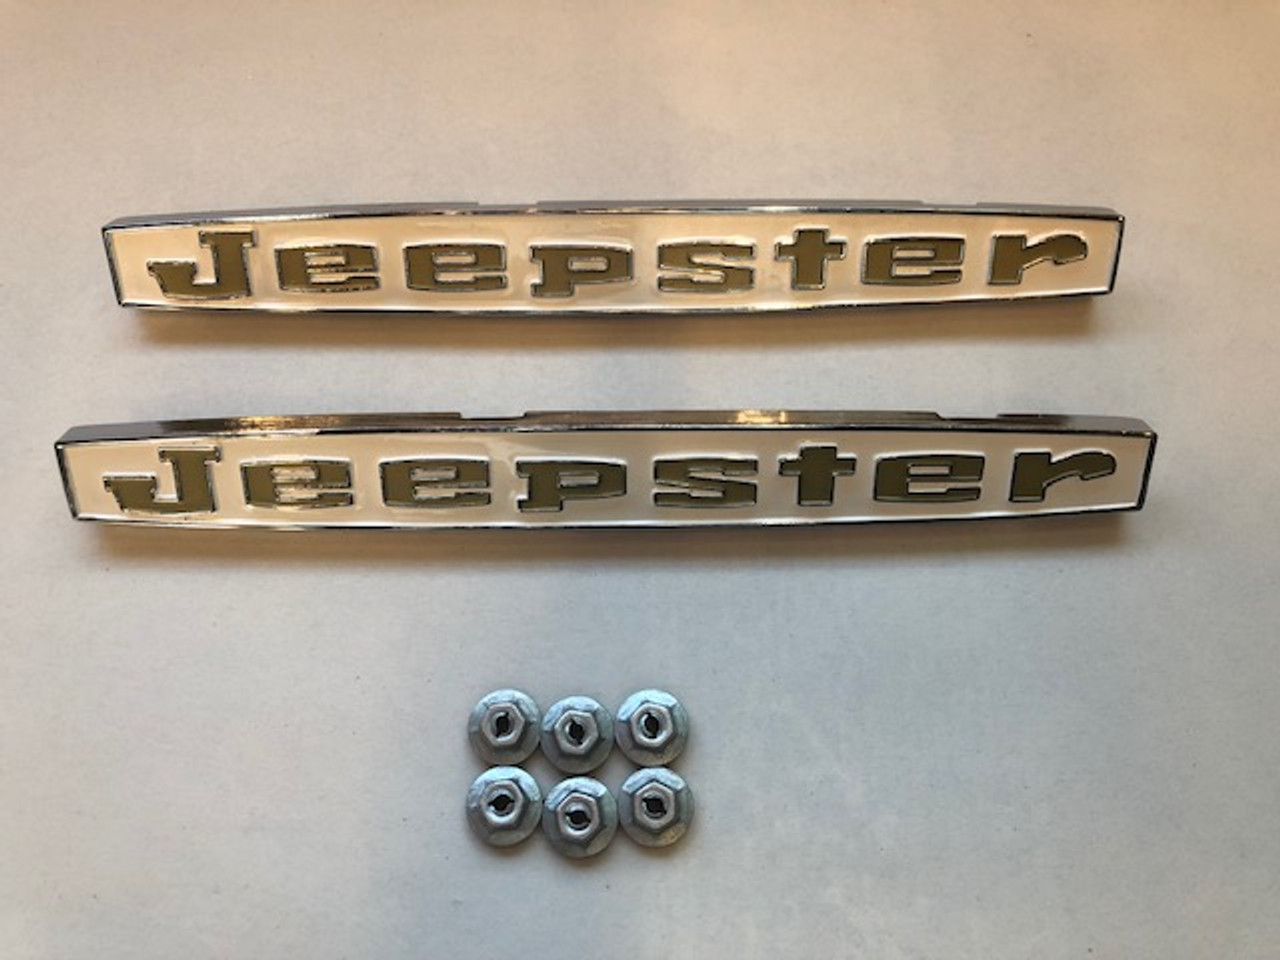 Jeepster Hood Kit, Gold. Save by buying as a kit!!



Includes:

2 Jeepster hood emblems, gold lettering

6 correct emblem nuts